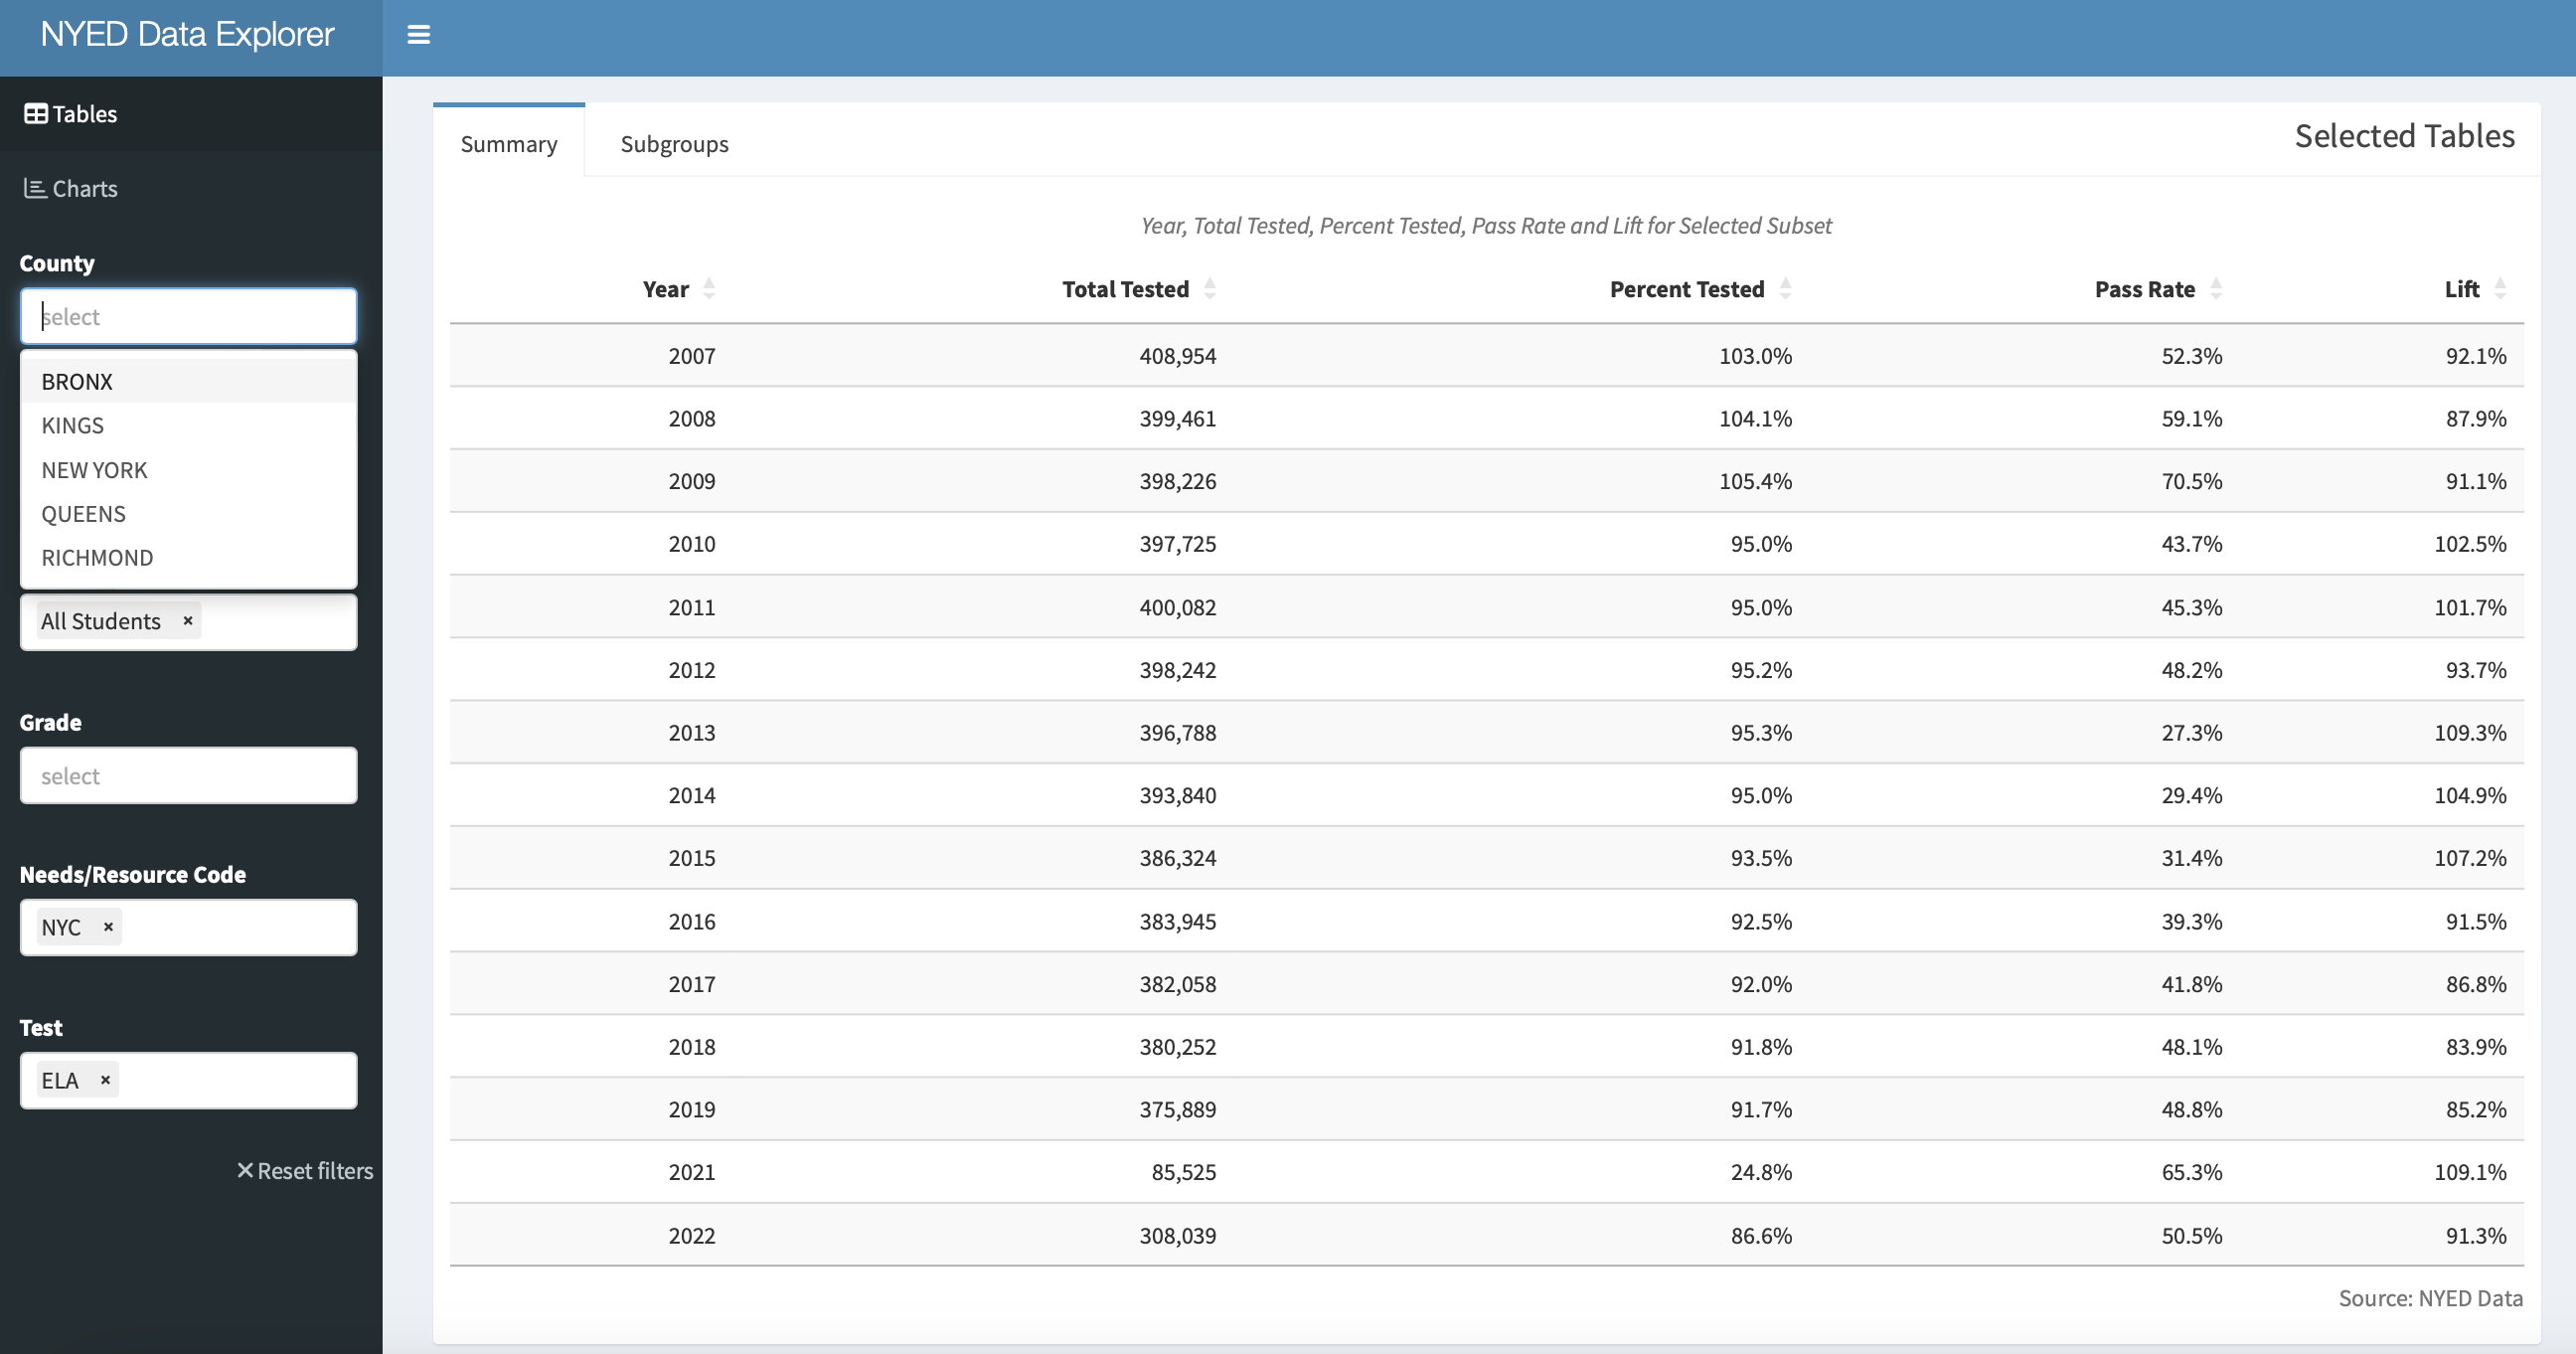 NYED Data Explorer filtered for All Students in NYC